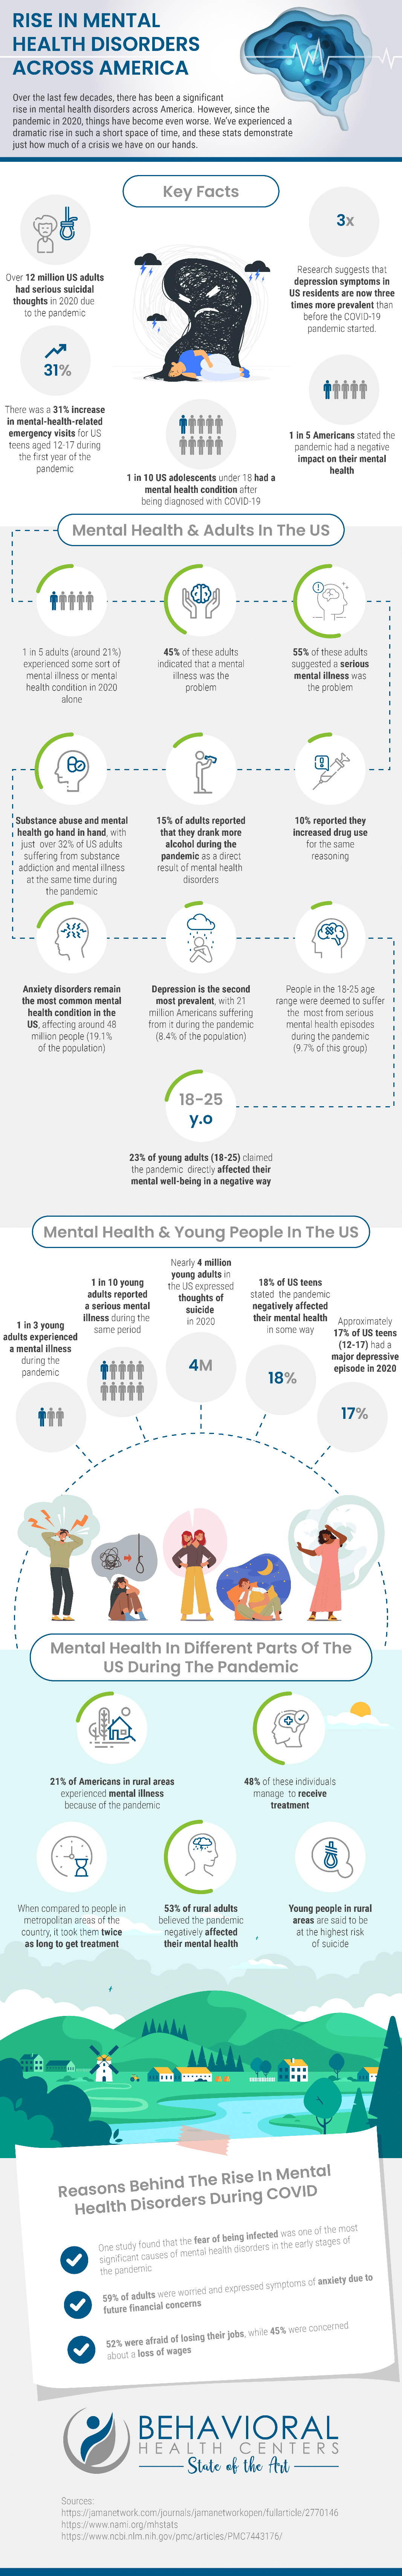 infographics about the rising mental health crisis in the United States